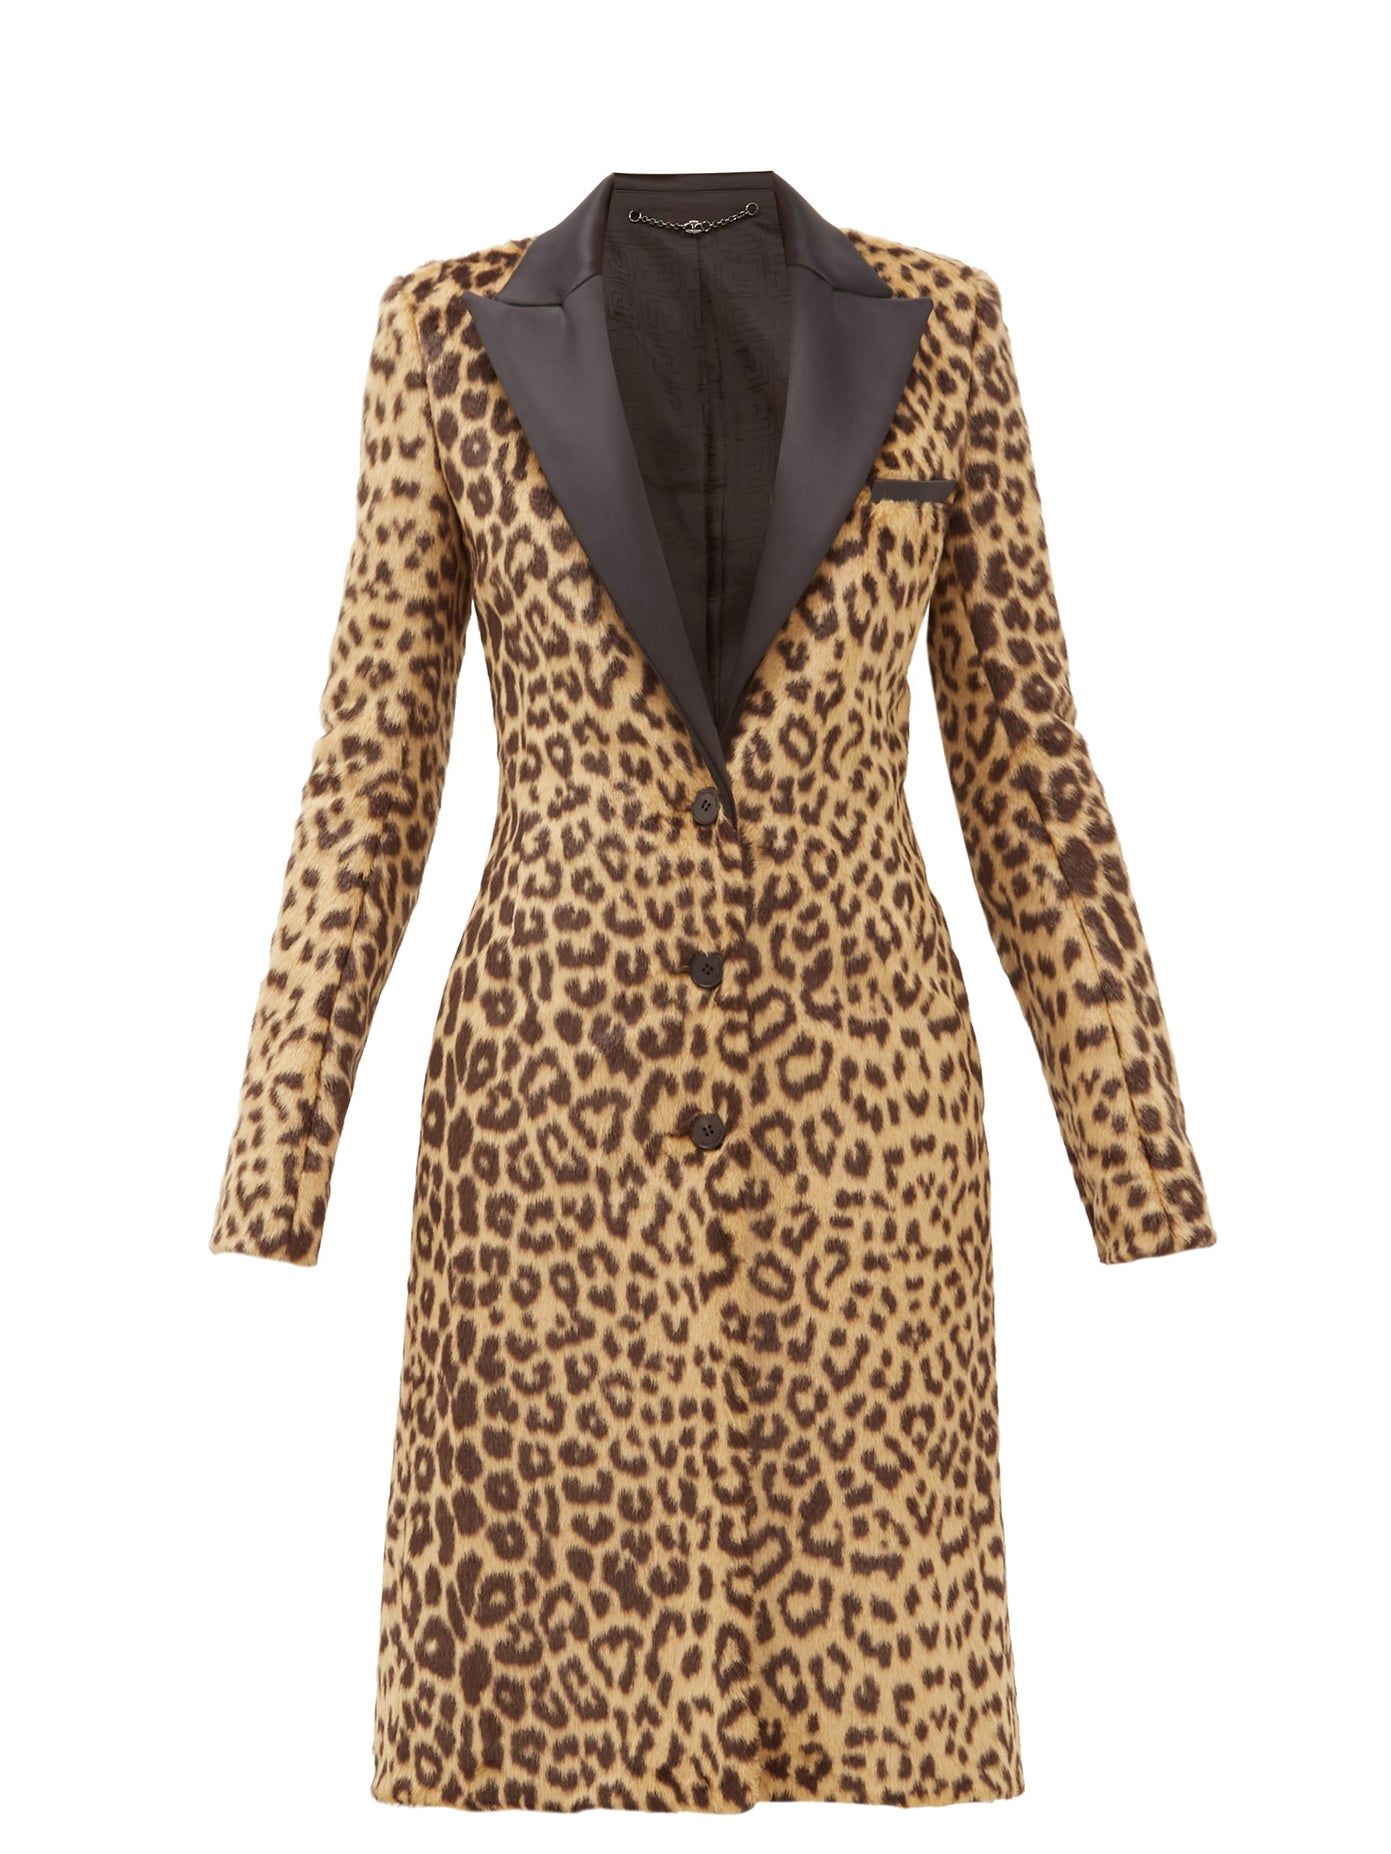 Leopard Printed Fur Coat
  Outfits